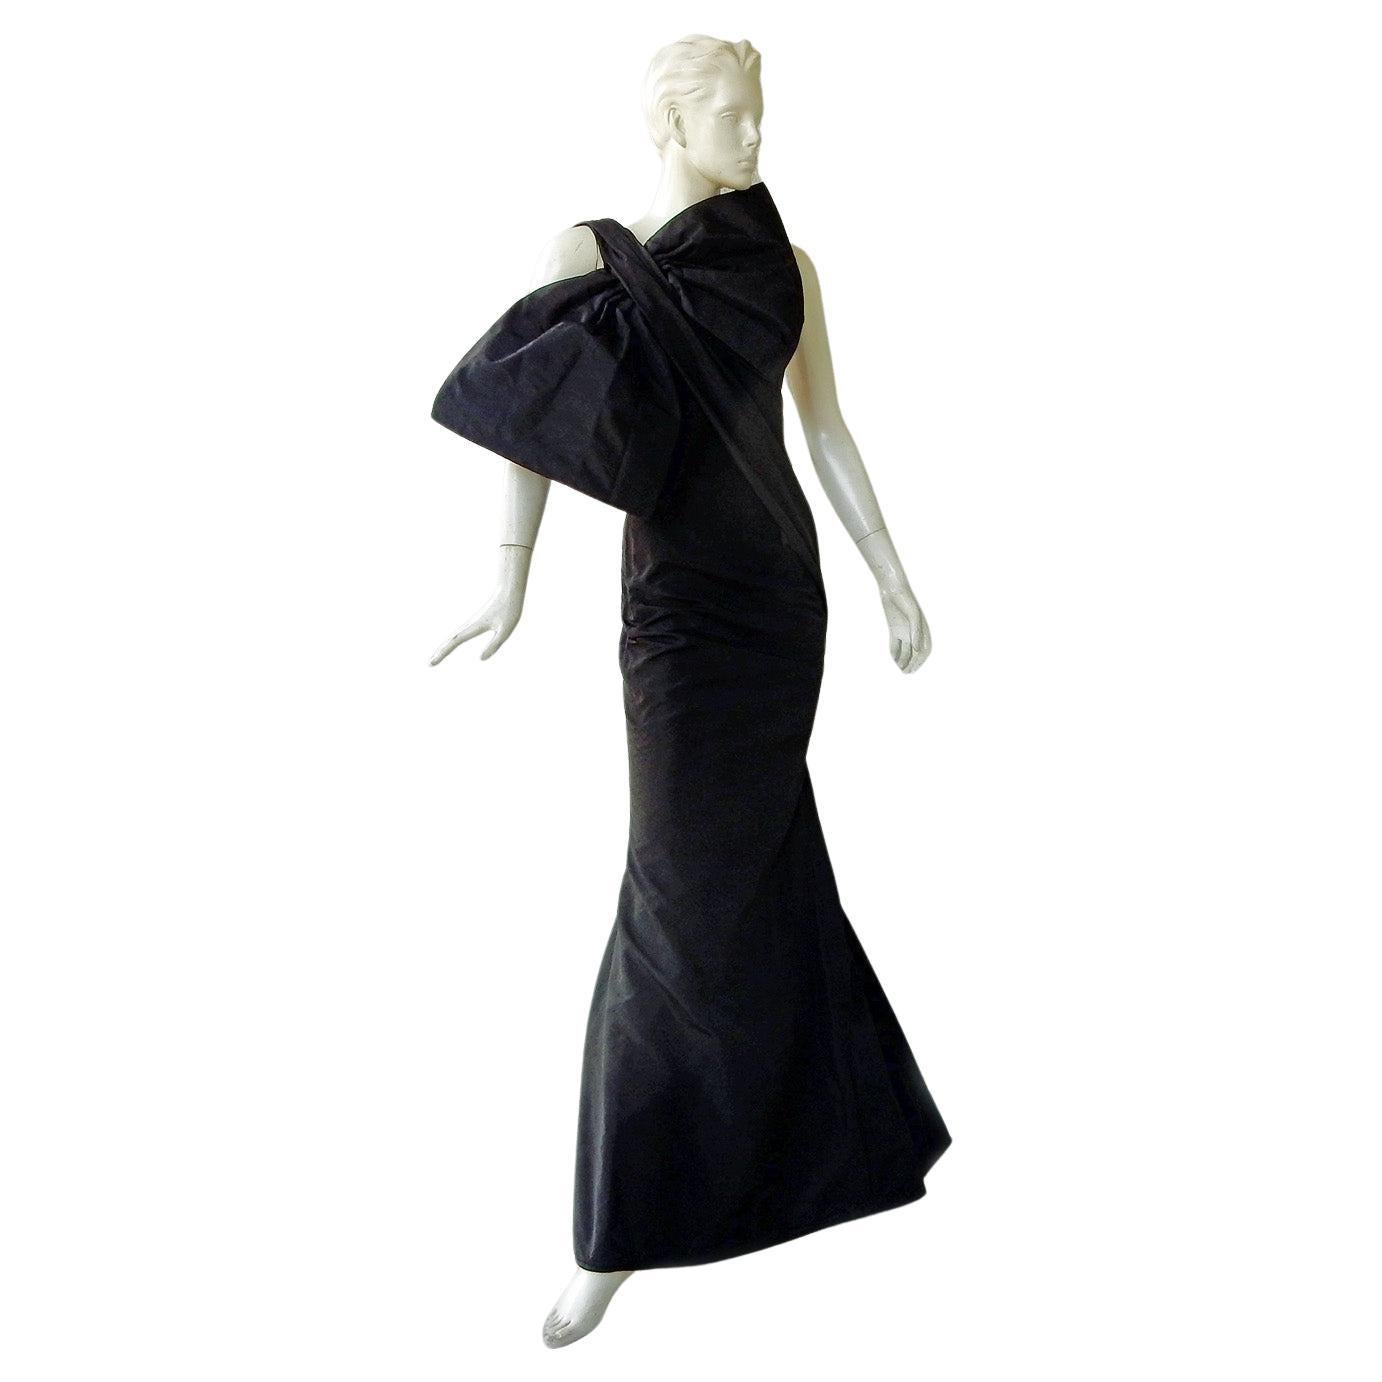 Alexander McQueen 2005 Showstopper Hi Fashion Runway Gown    Special Event Dress For Sale